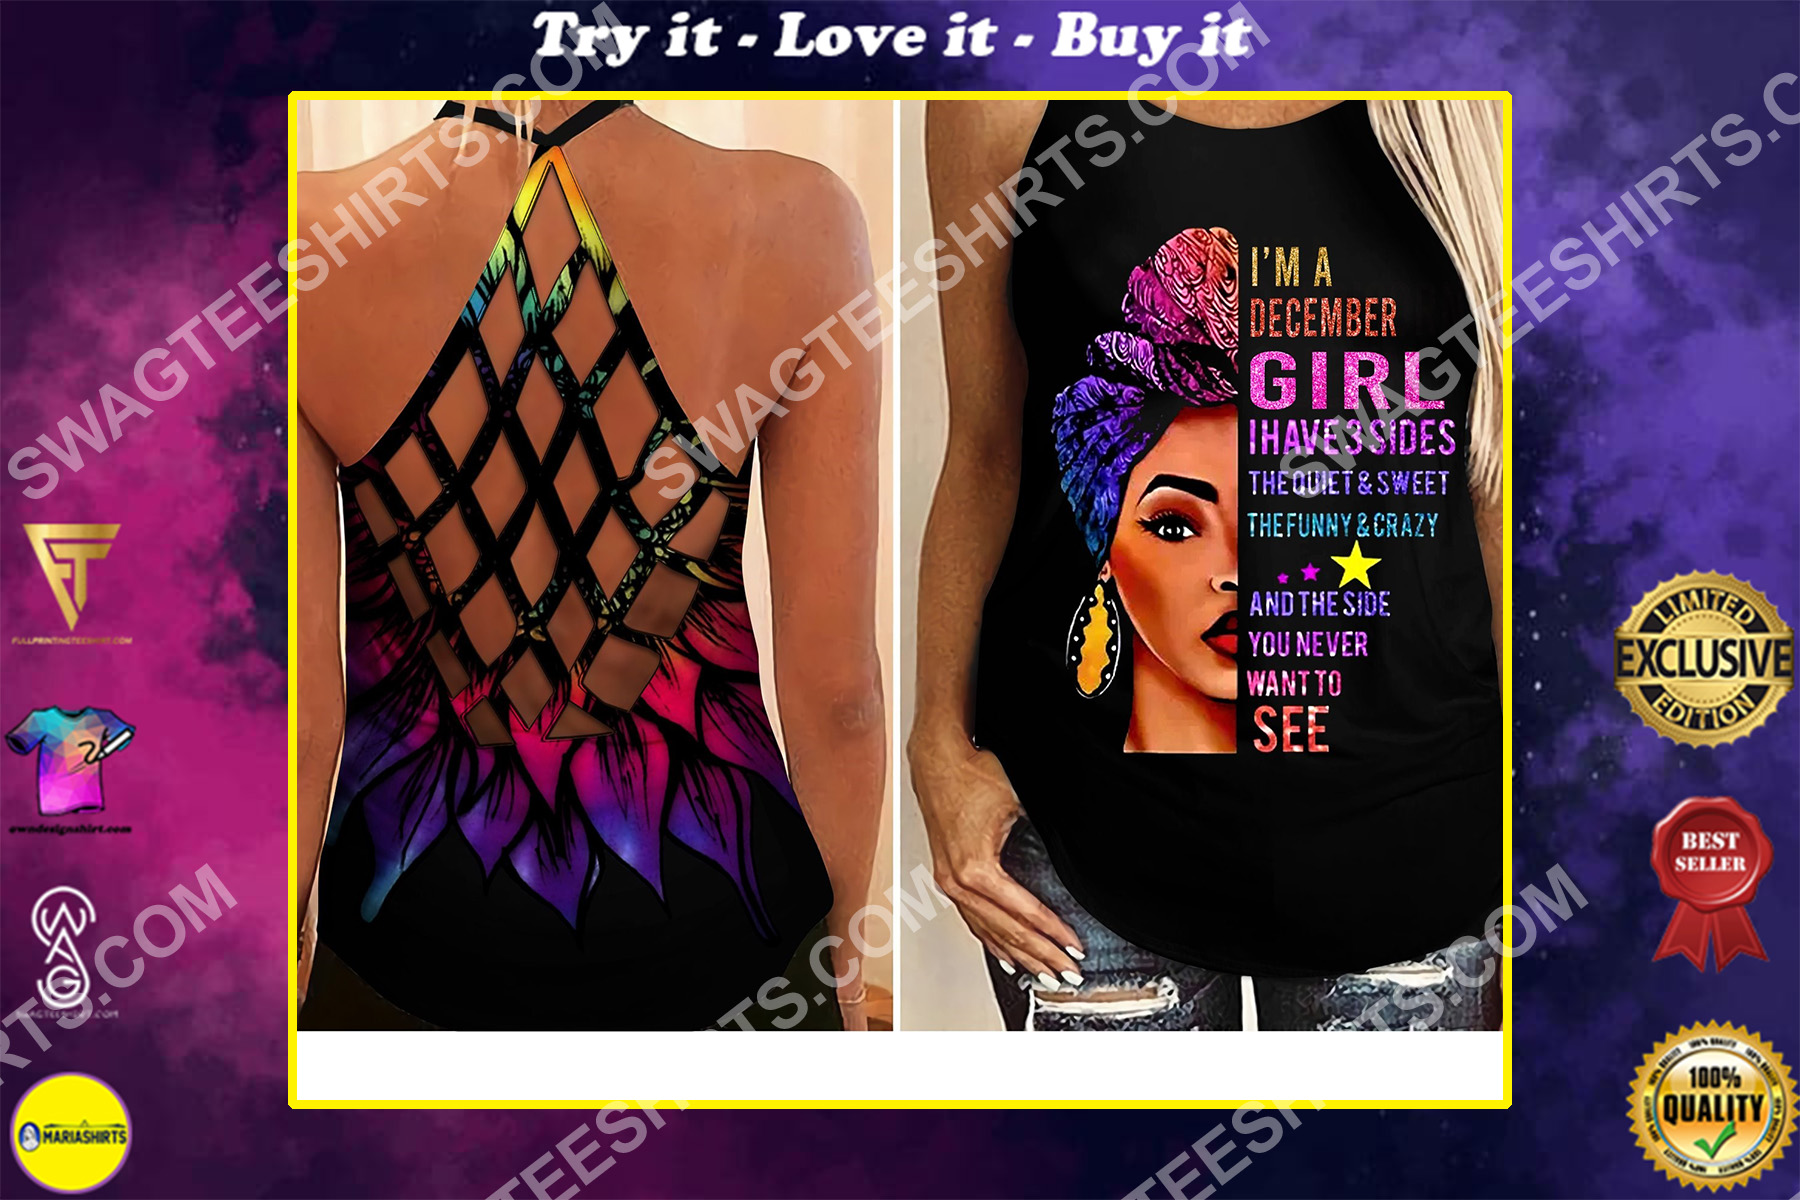 i'm a december girl i have 3 sides the quiet and sweet all over printed criss-cross tank top